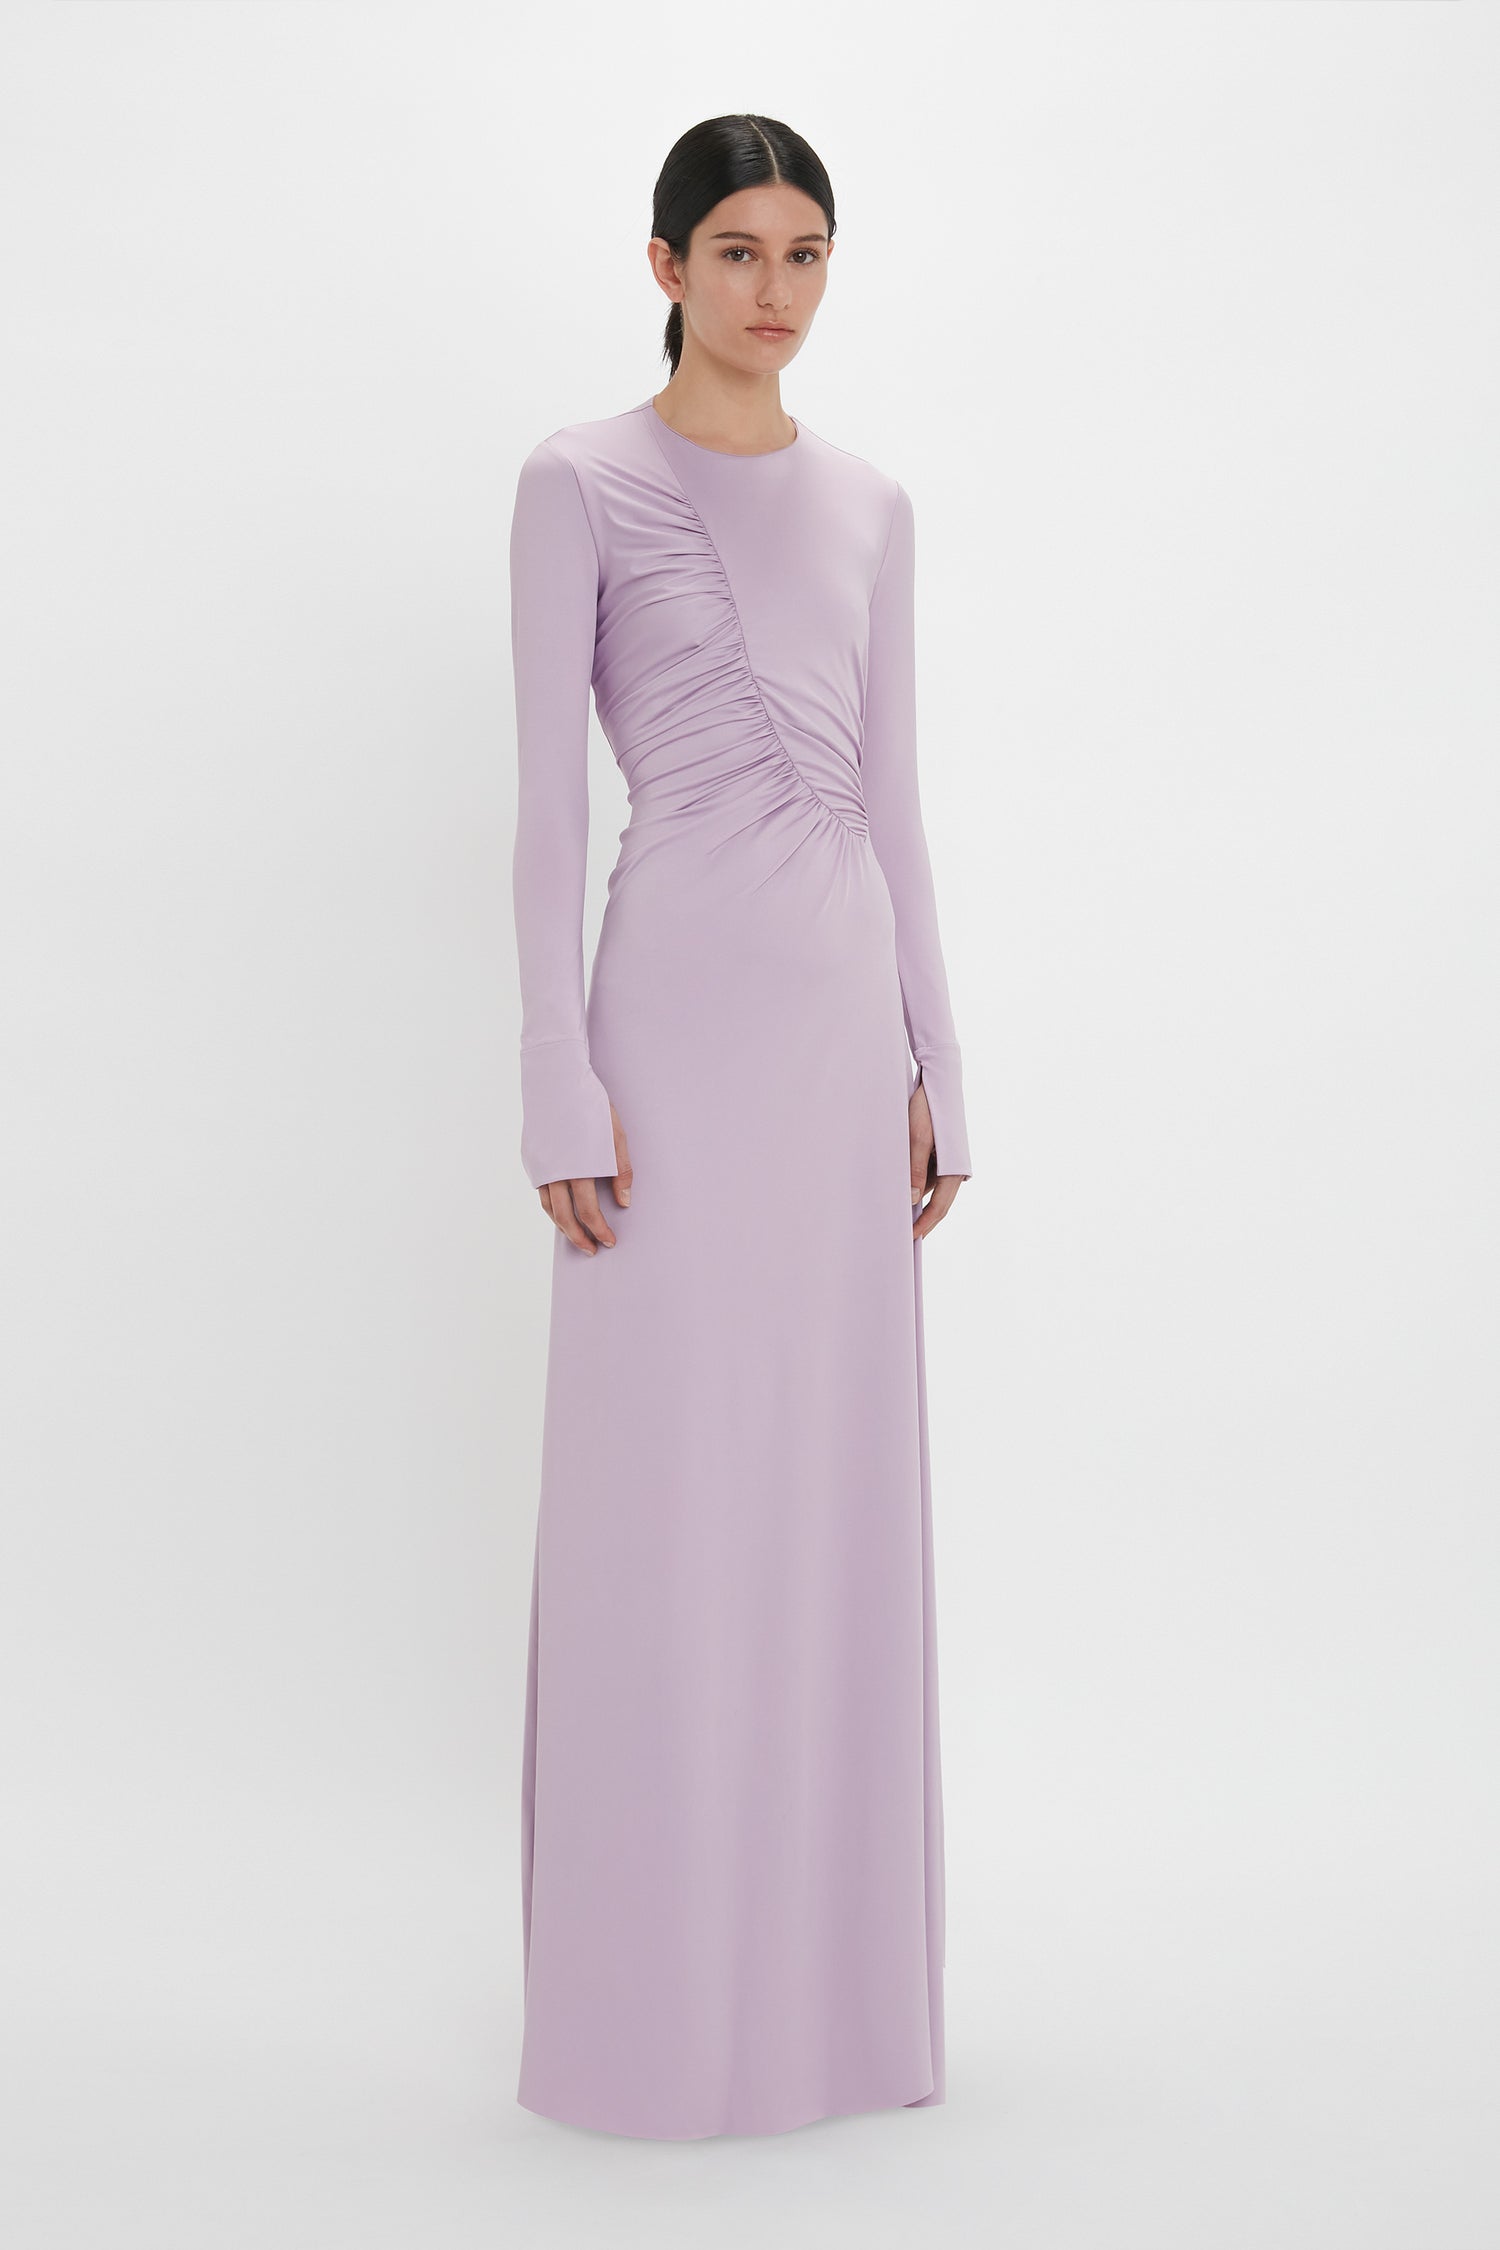 A person is standing and wearing a long-sleeved, floor-length Ruched Detail Floor-Length Gown In Petunia by Victoria Beckham that embodies understated glamour. The background is plain white.